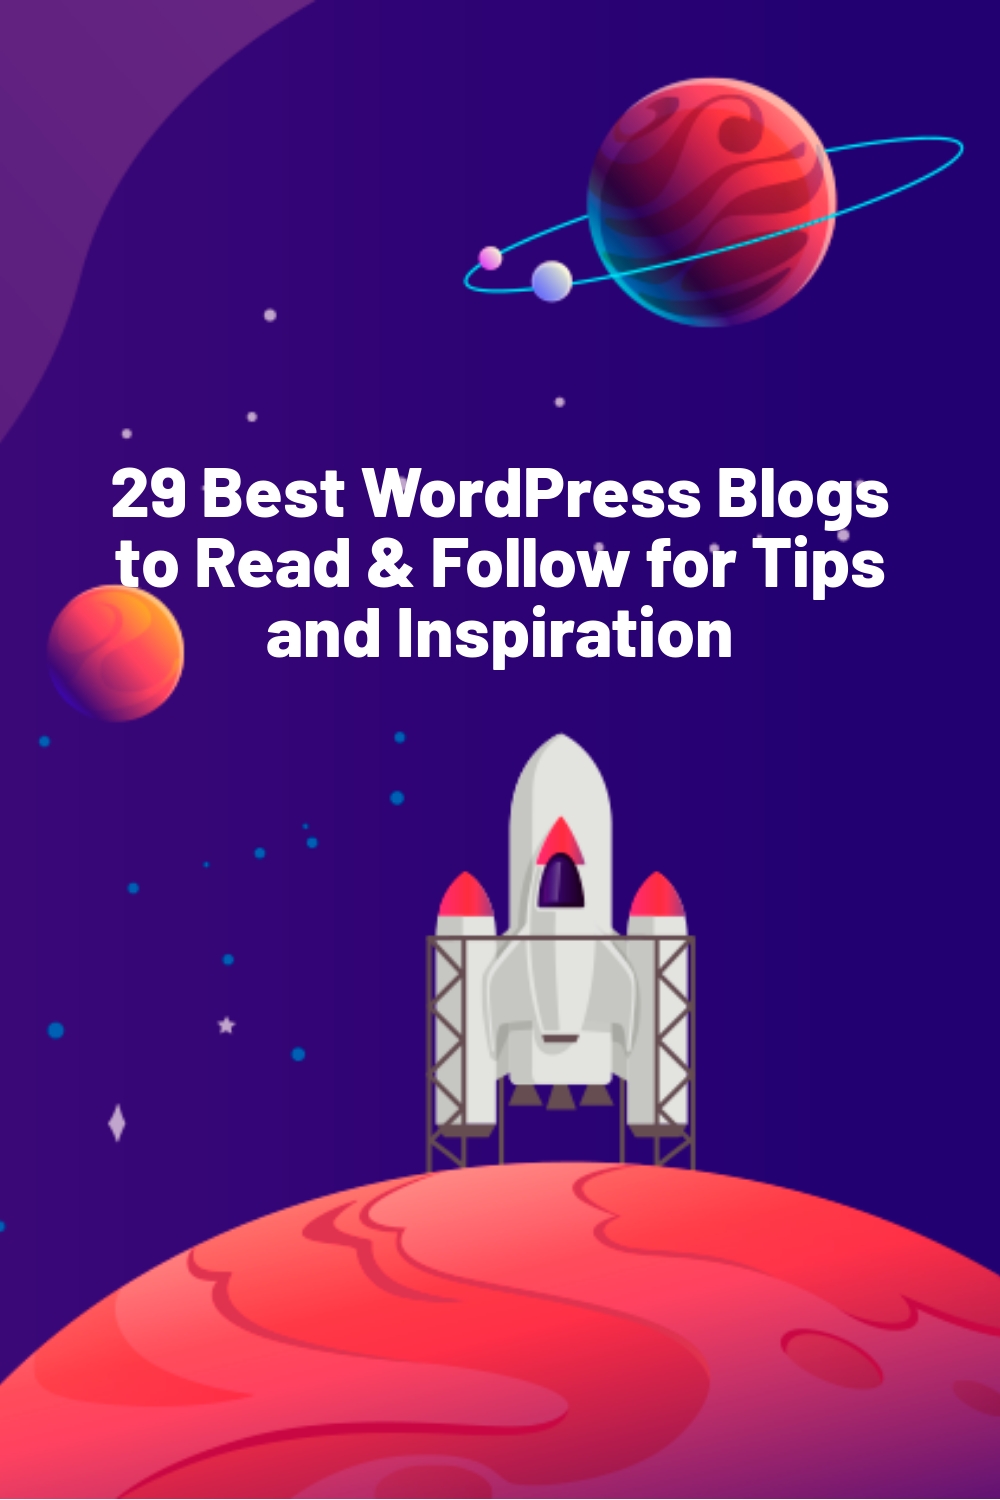 29 Best WordPress Blogs to Read & Follow for Tips and Inspiration